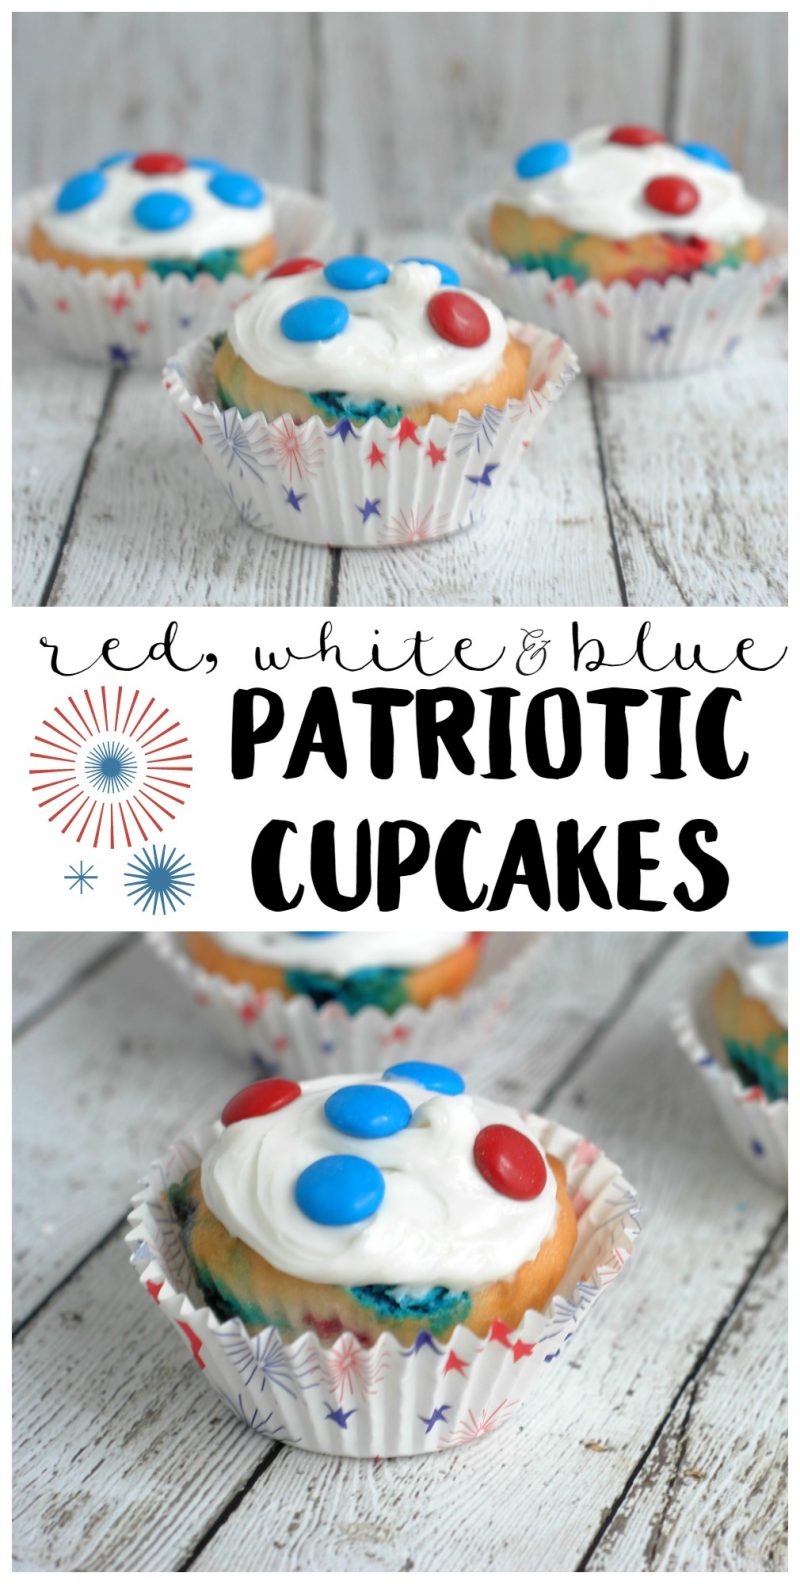 If you’re looking for easy and cute recipe ideas for the 4th of July, check out these Red White and Blue Patriotic Cupcakes! Whether you’re making dessert for your kids at home or making food for a crowd at a 4th of July party or BBQ, these are easy to make and delicious to eat!